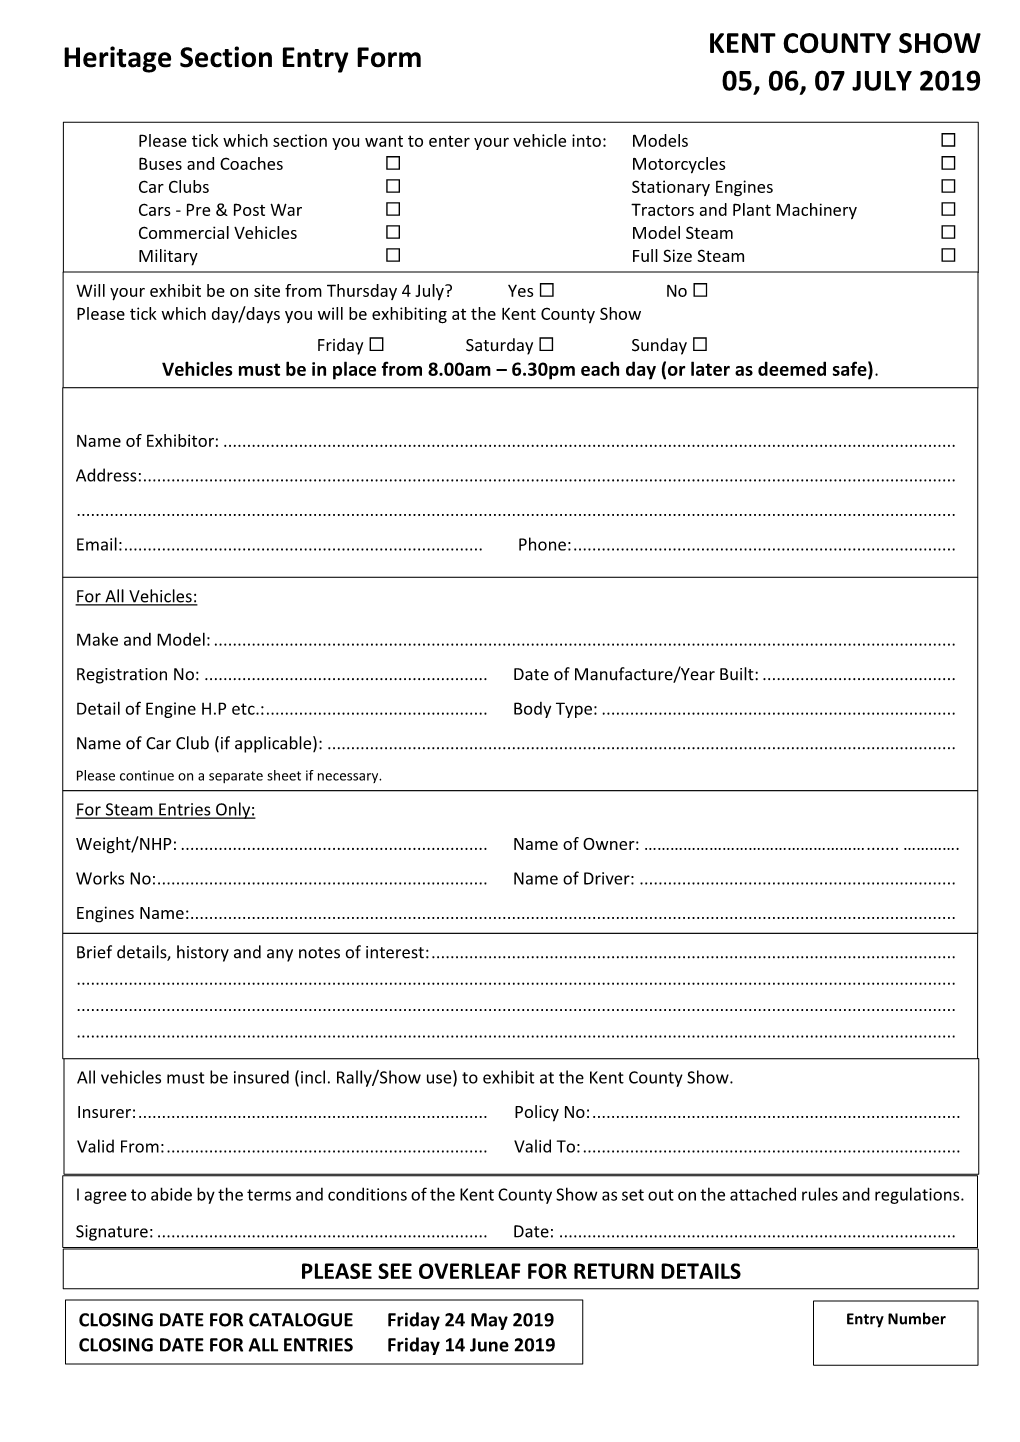 Heritage Section Entry Form KENT COUNTY SHOW 05, 06, 07 JULY 2019